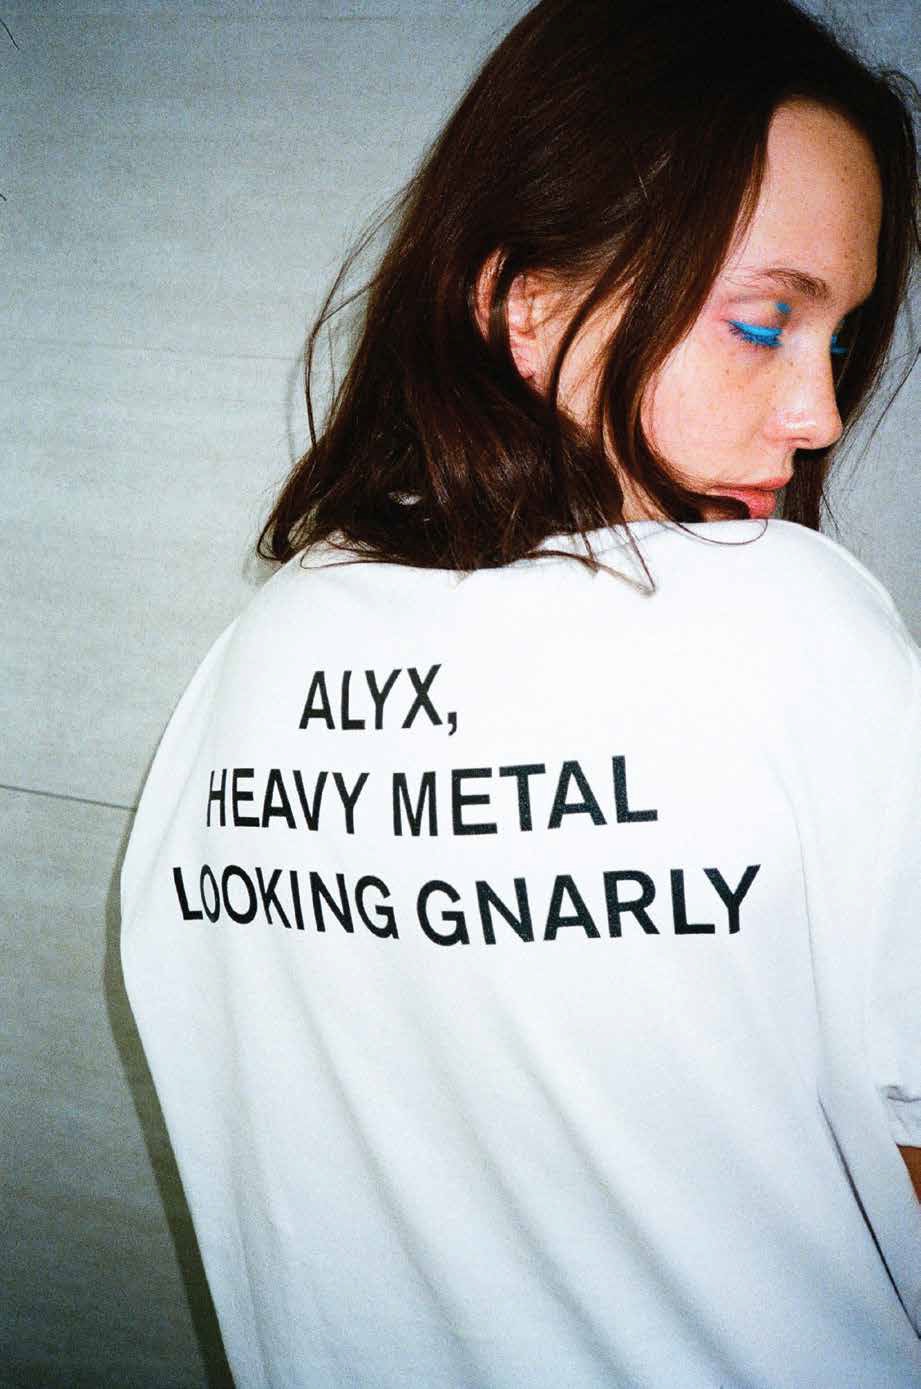 ALYX Visual 2018 Spring/Summer Lookbook Collection 3 pack T shirt drop 2018 february 23 26 studio upcycle ethical sustainable cotton 185 usd